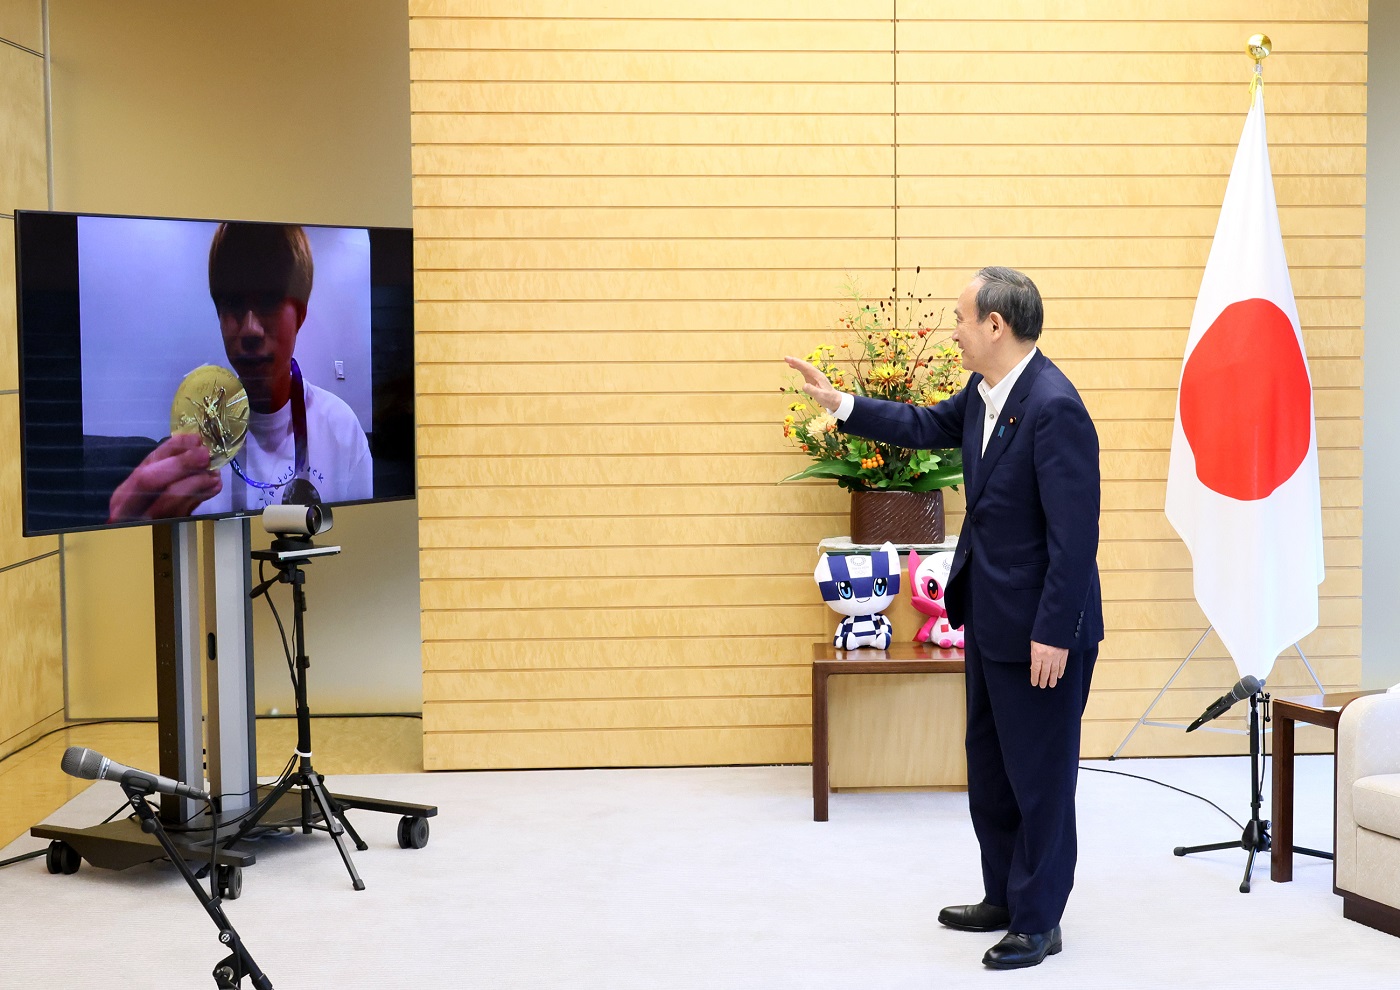 Photograph of the Prime Minister holding a meeting with skateboarder Horigome (6)